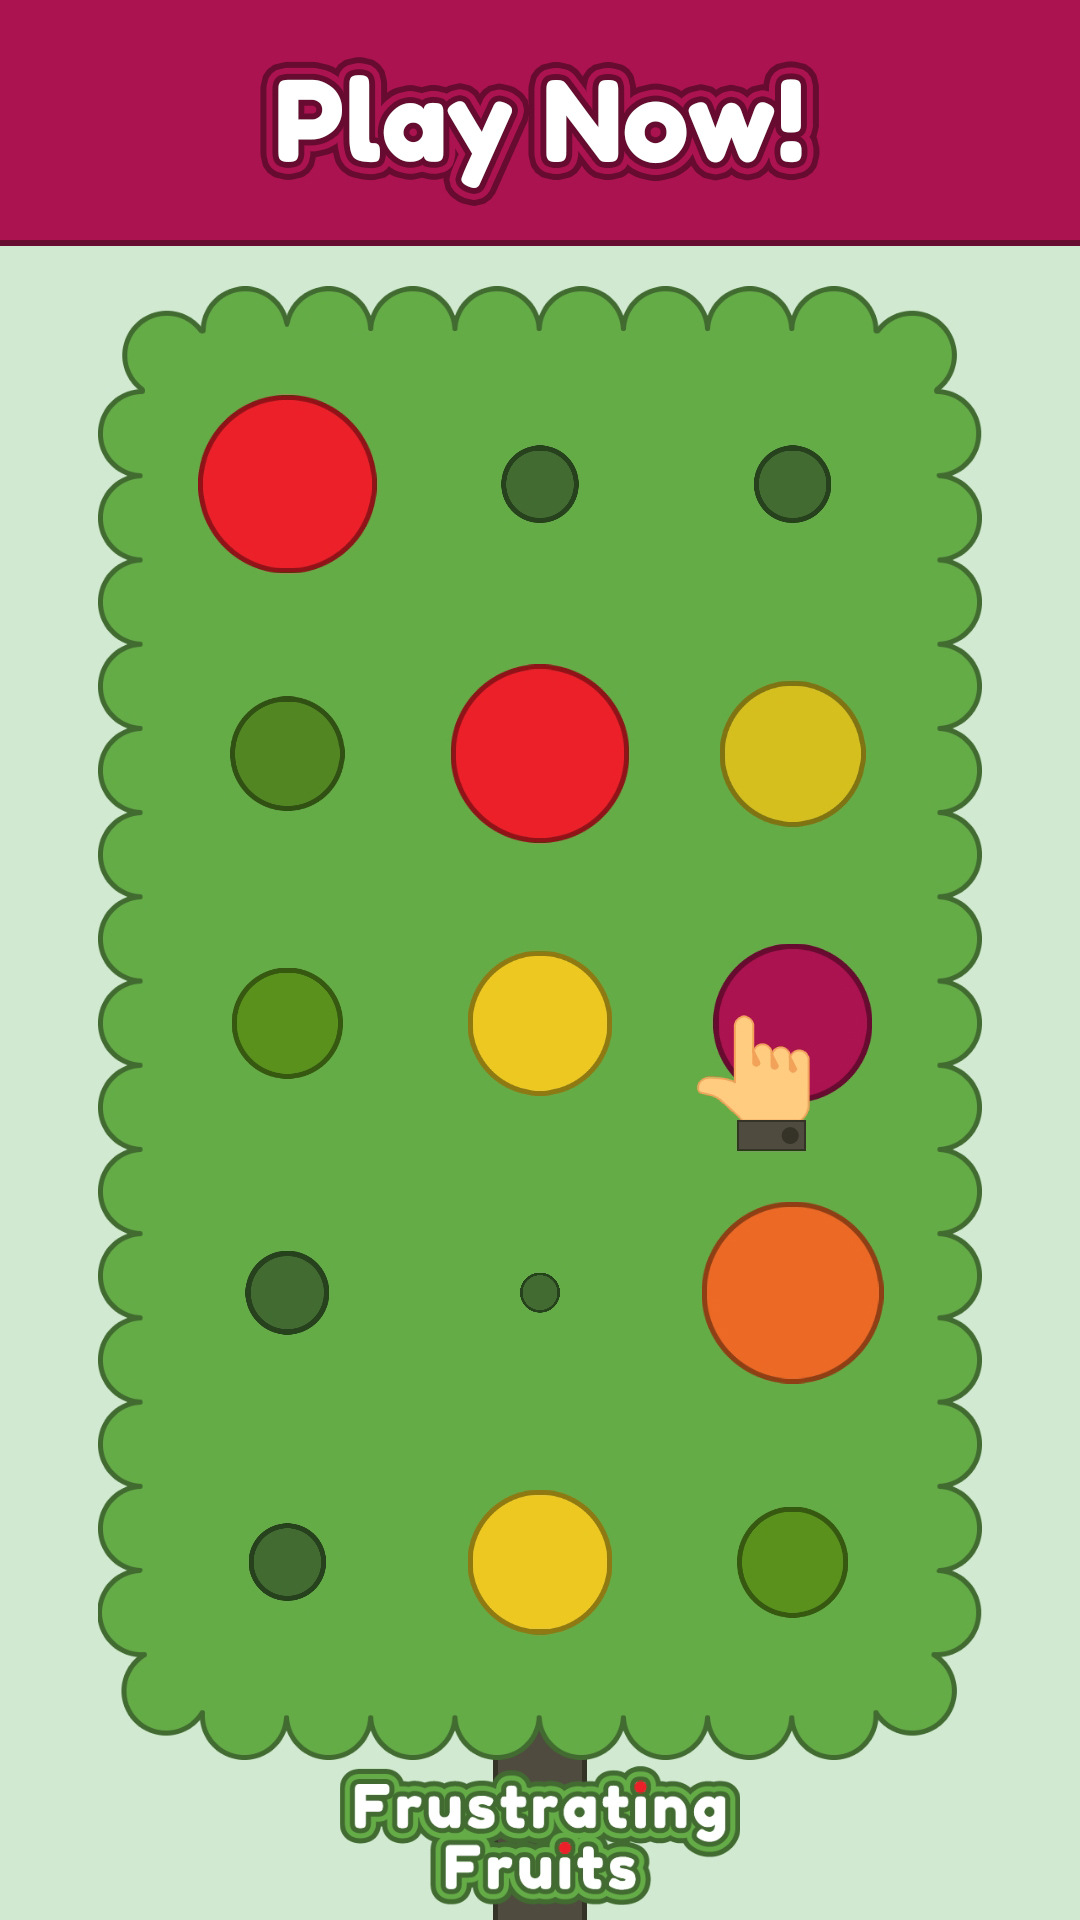 Frustrating Fruits - Play Now